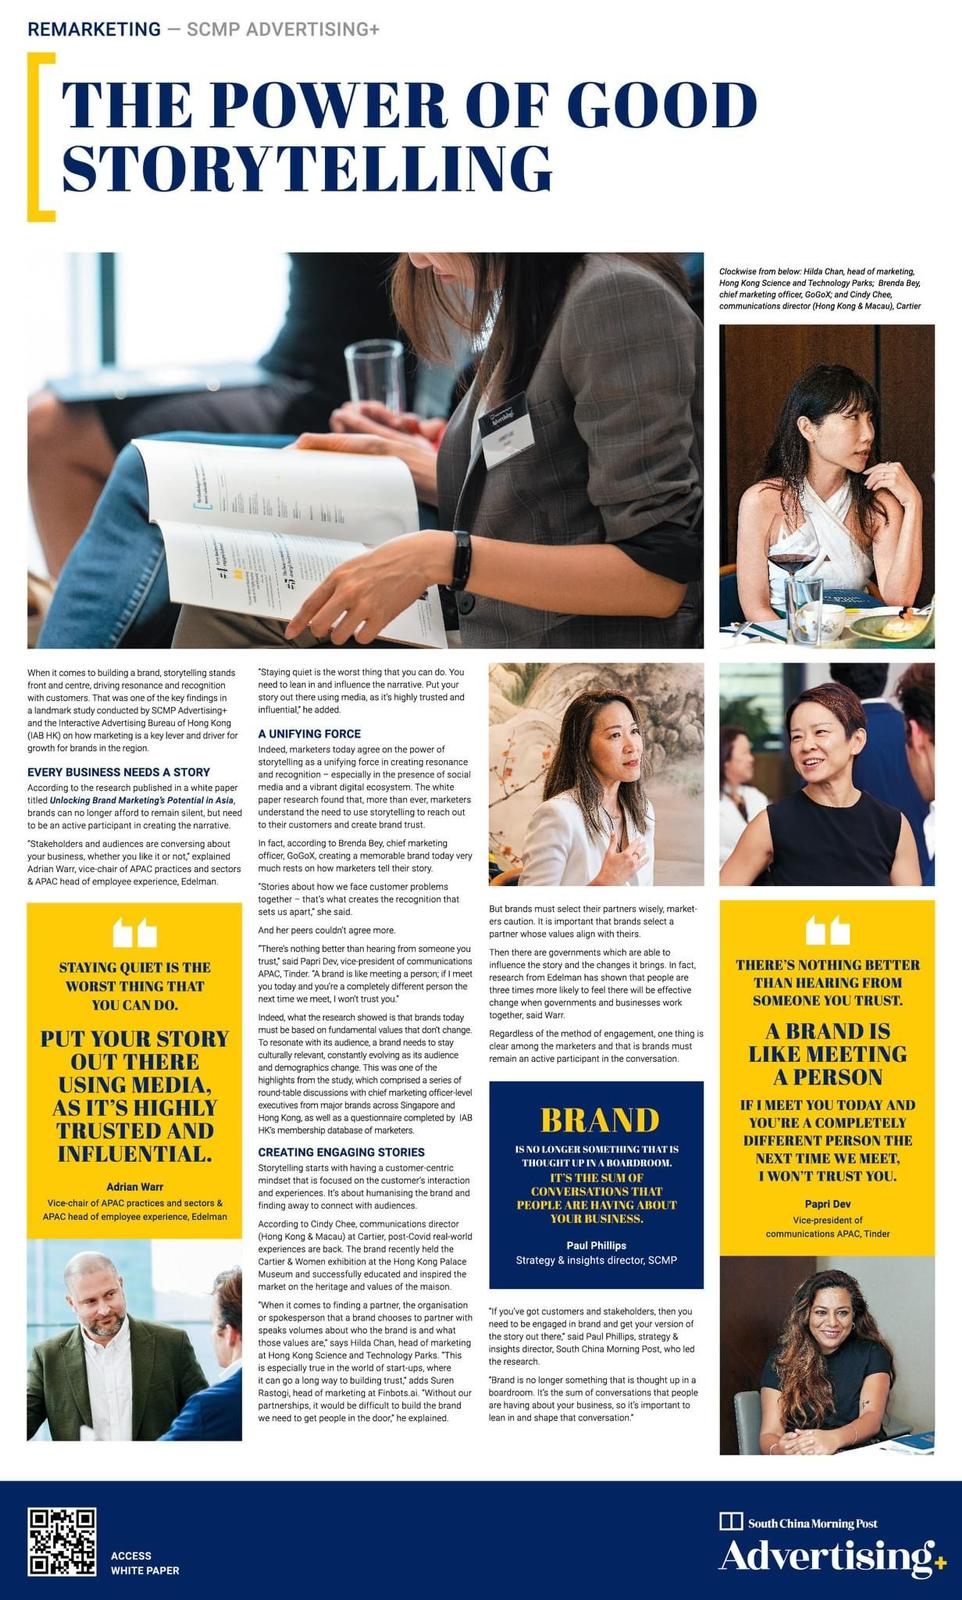 SCMP Advertising+ and IAB HK study shows why every business needs a good story